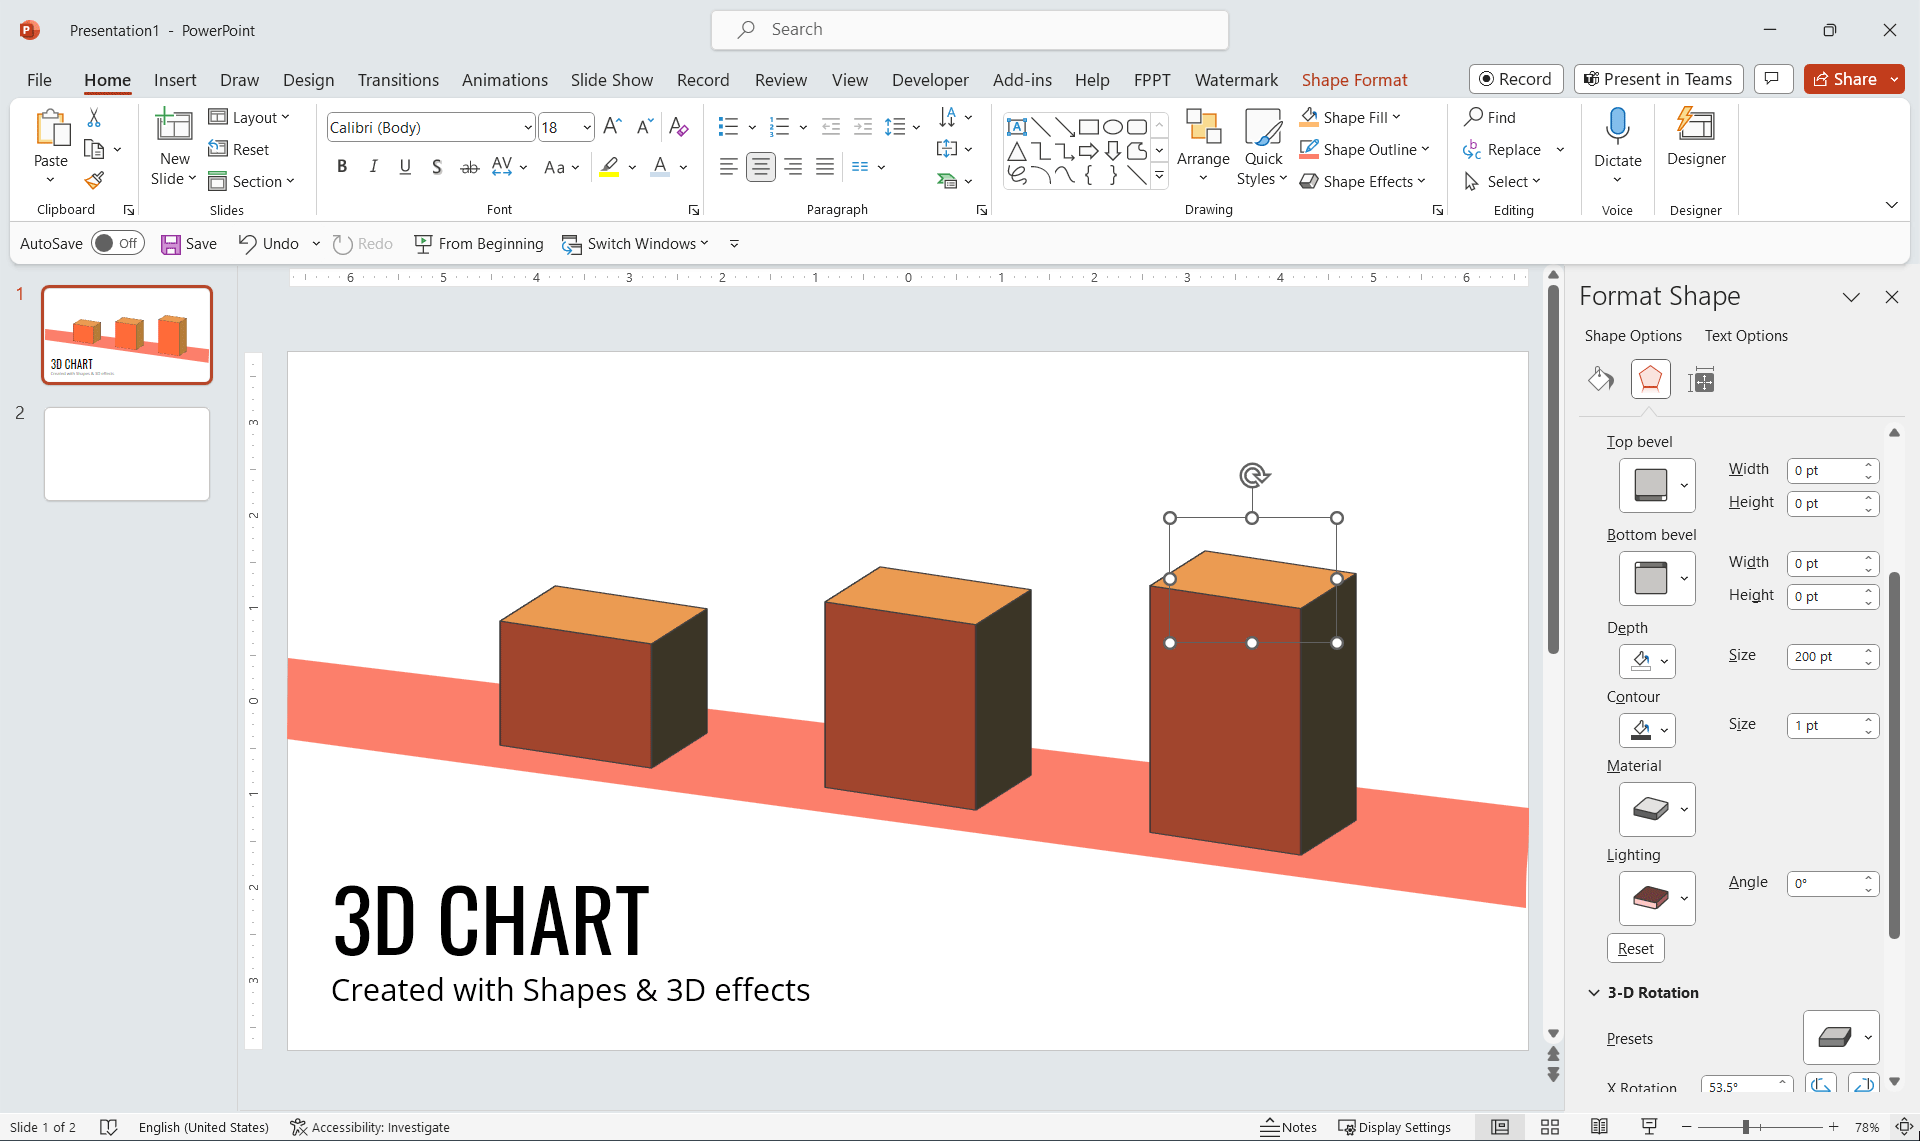 How to Make a 3D Column Chart in PowerPoint using Shapes and 3D effects with Perspective